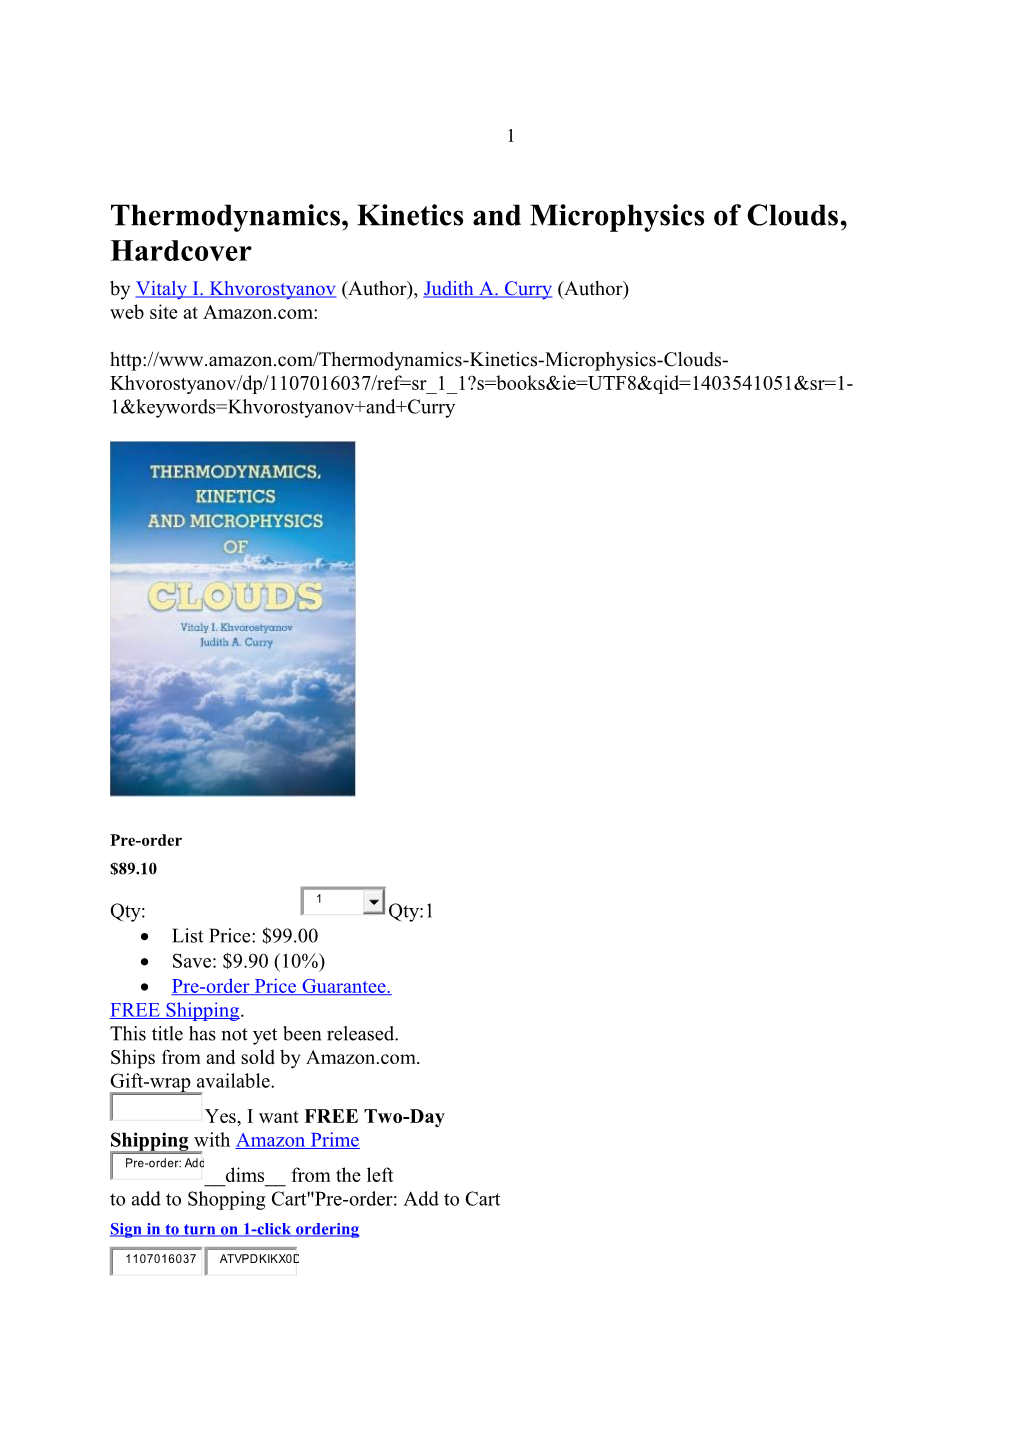 Thermodynamics, Kinetics and Microphysics of Clouds, Hardcover